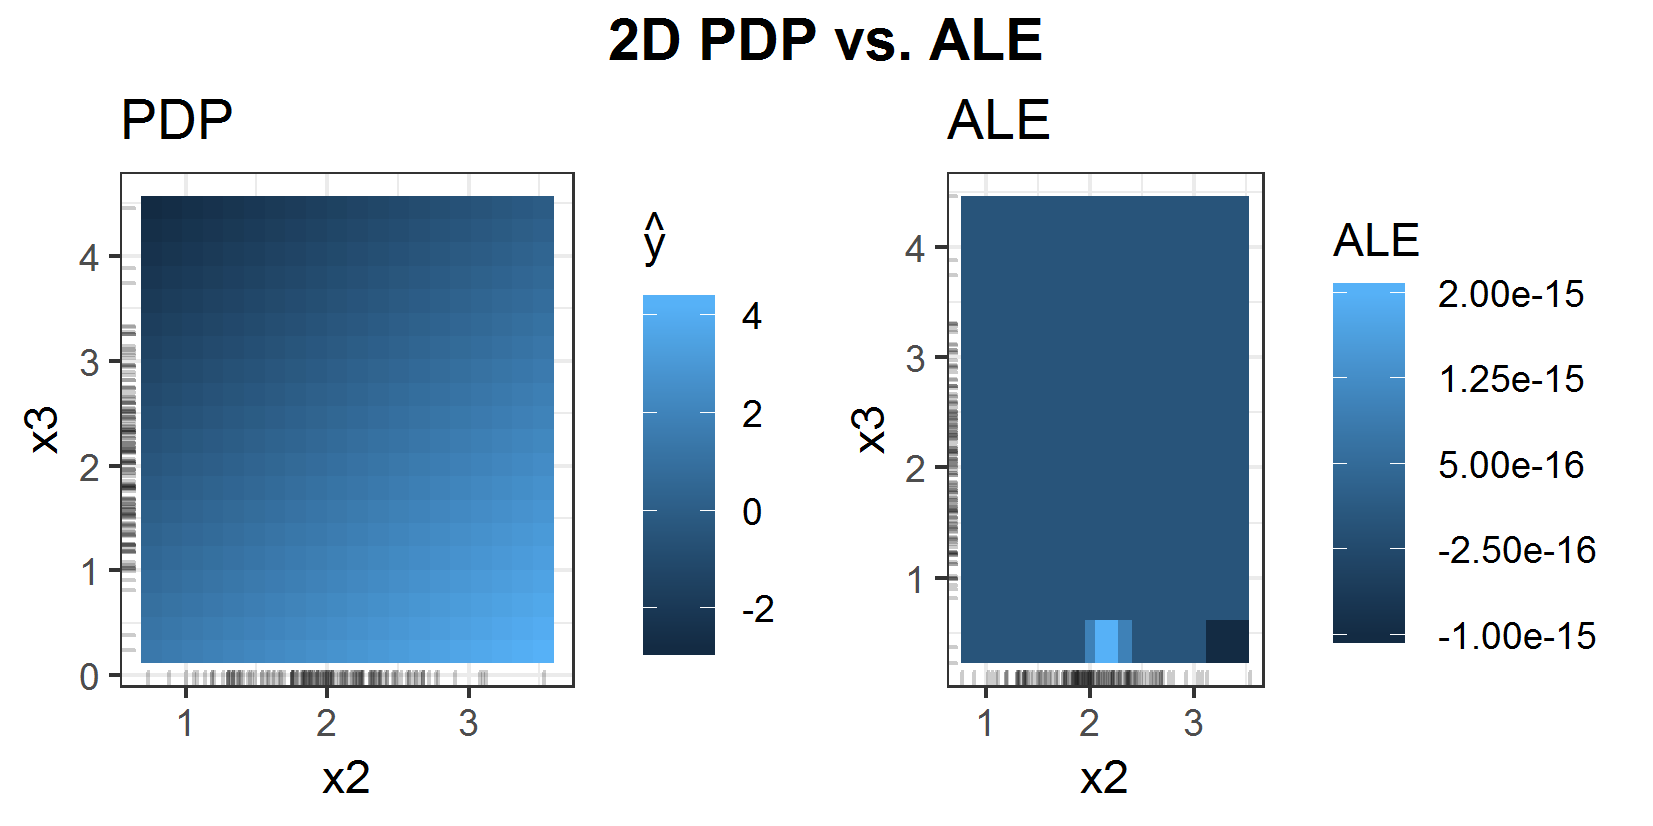 2D PDP (left) vs. 2D ALE (right) for prediction function \(f(x_1, x_2, x_3) = x_1 + x_2 - x_3\).